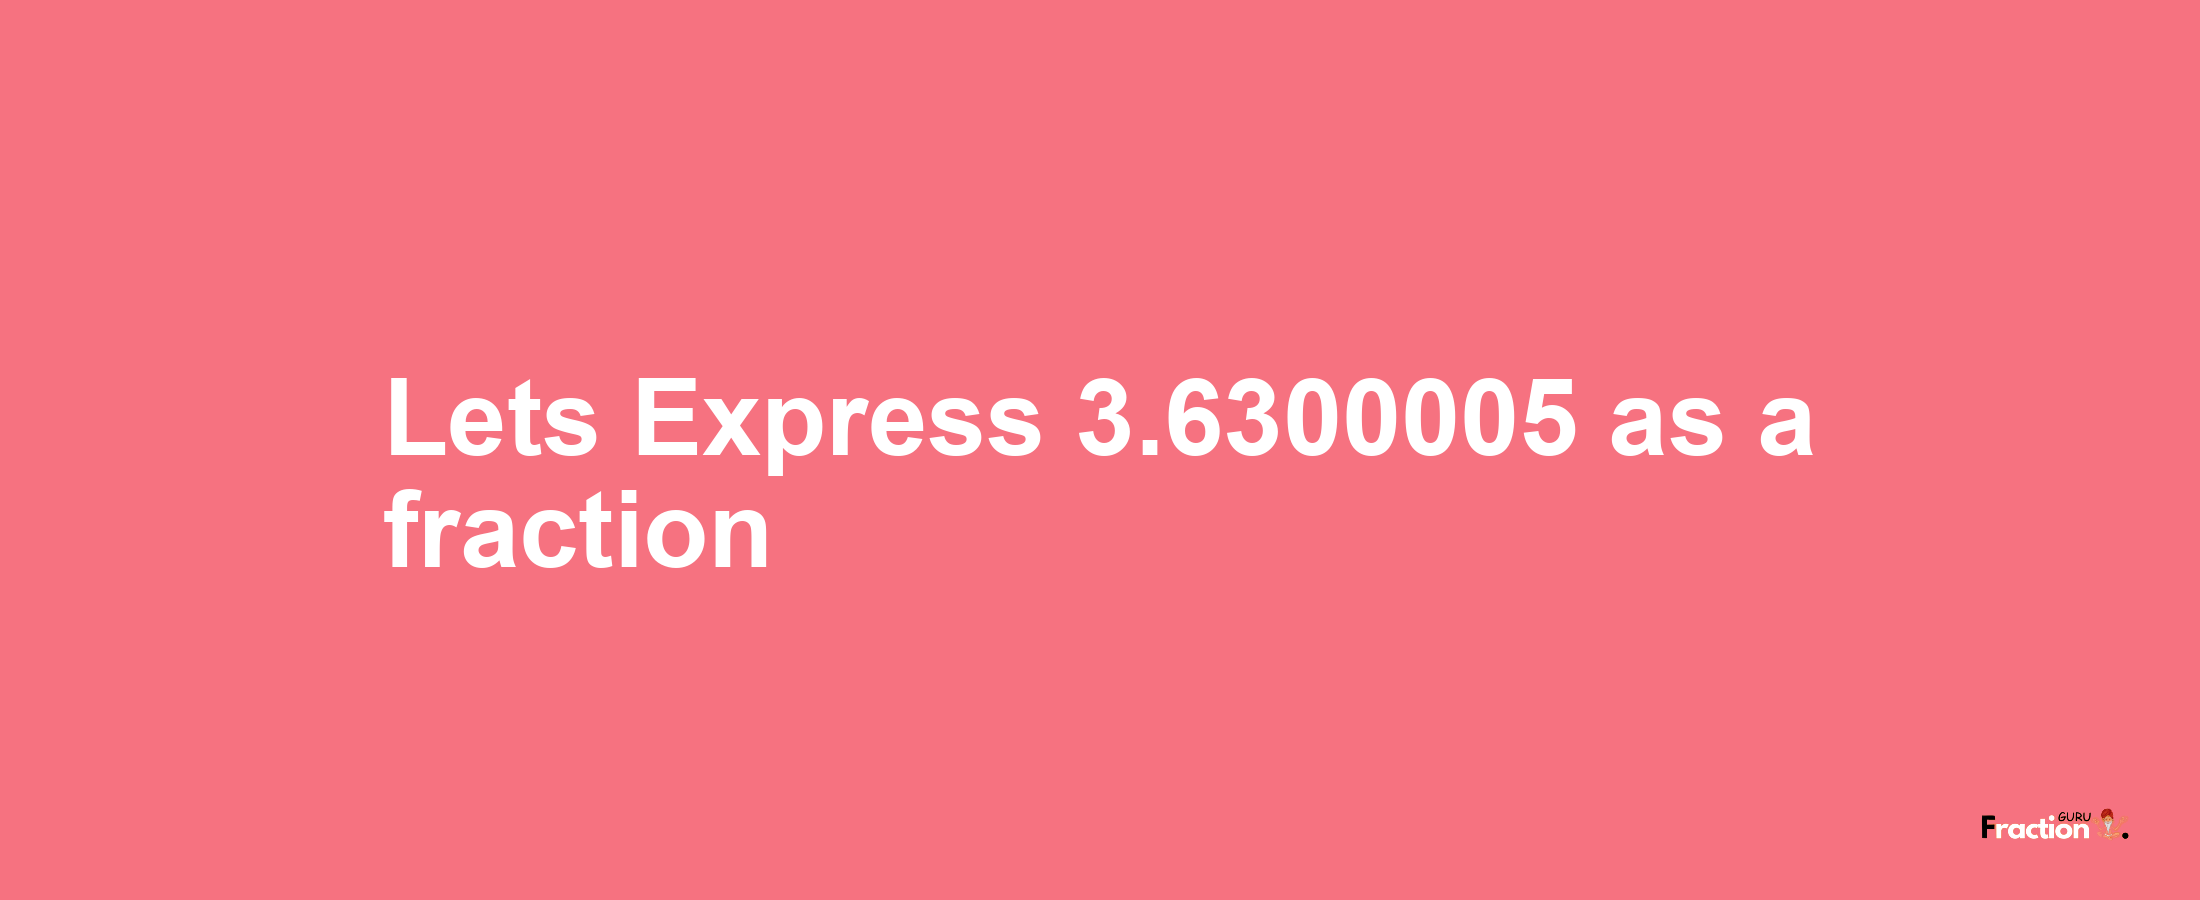 Lets Express 3.6300005 as afraction